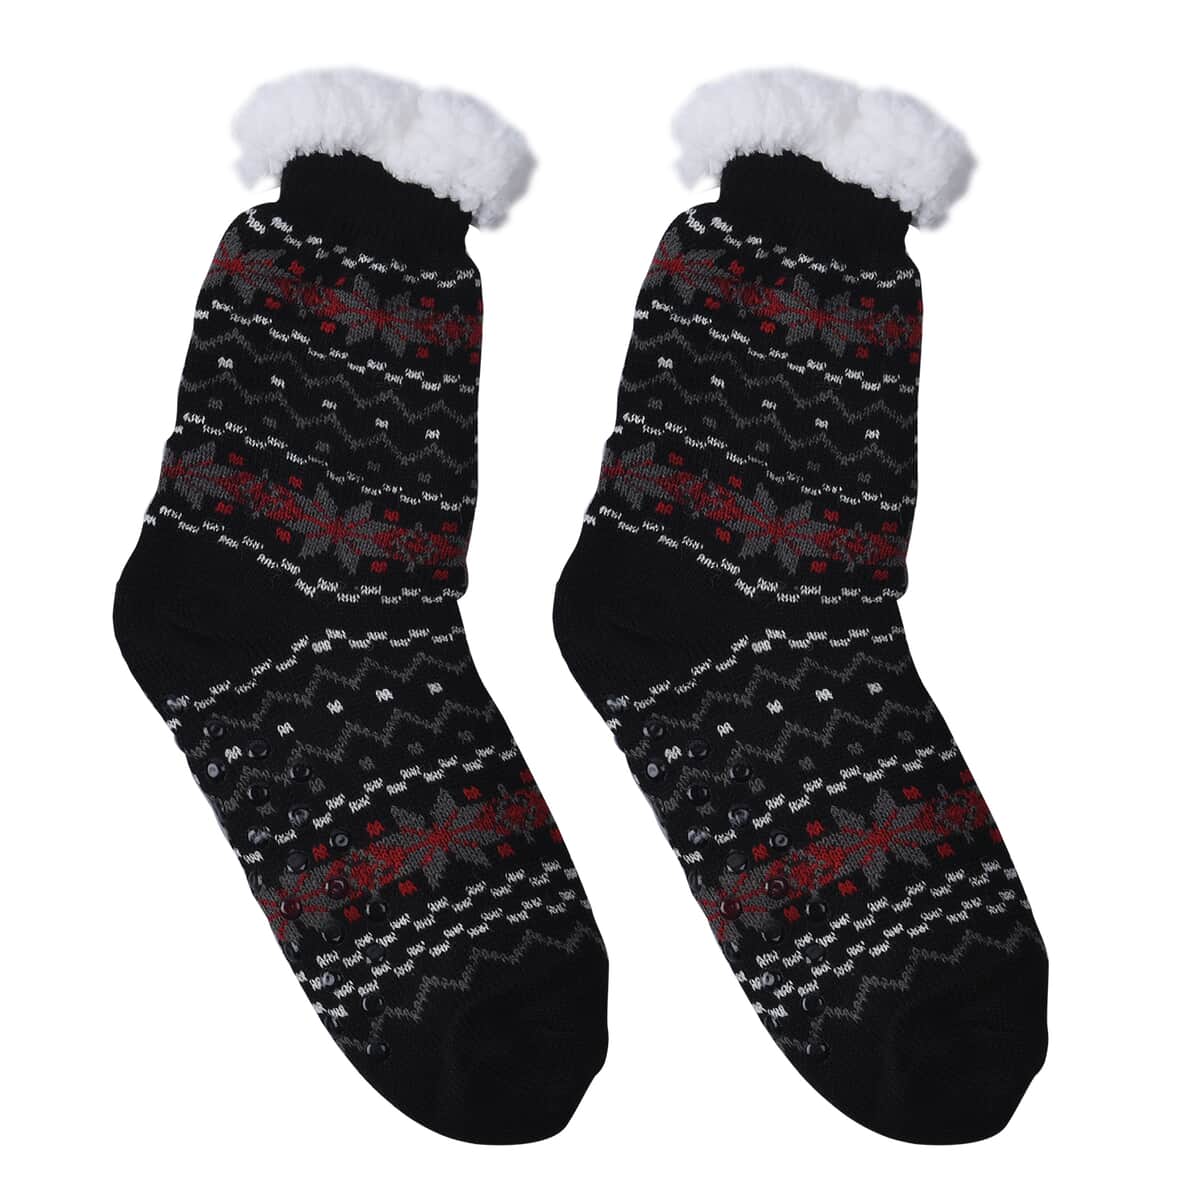 Homesmart Set of 2 Pairs White Snowflake and Navy Blue with Inside Sherpa Acrylic Knitted Socks image number 1